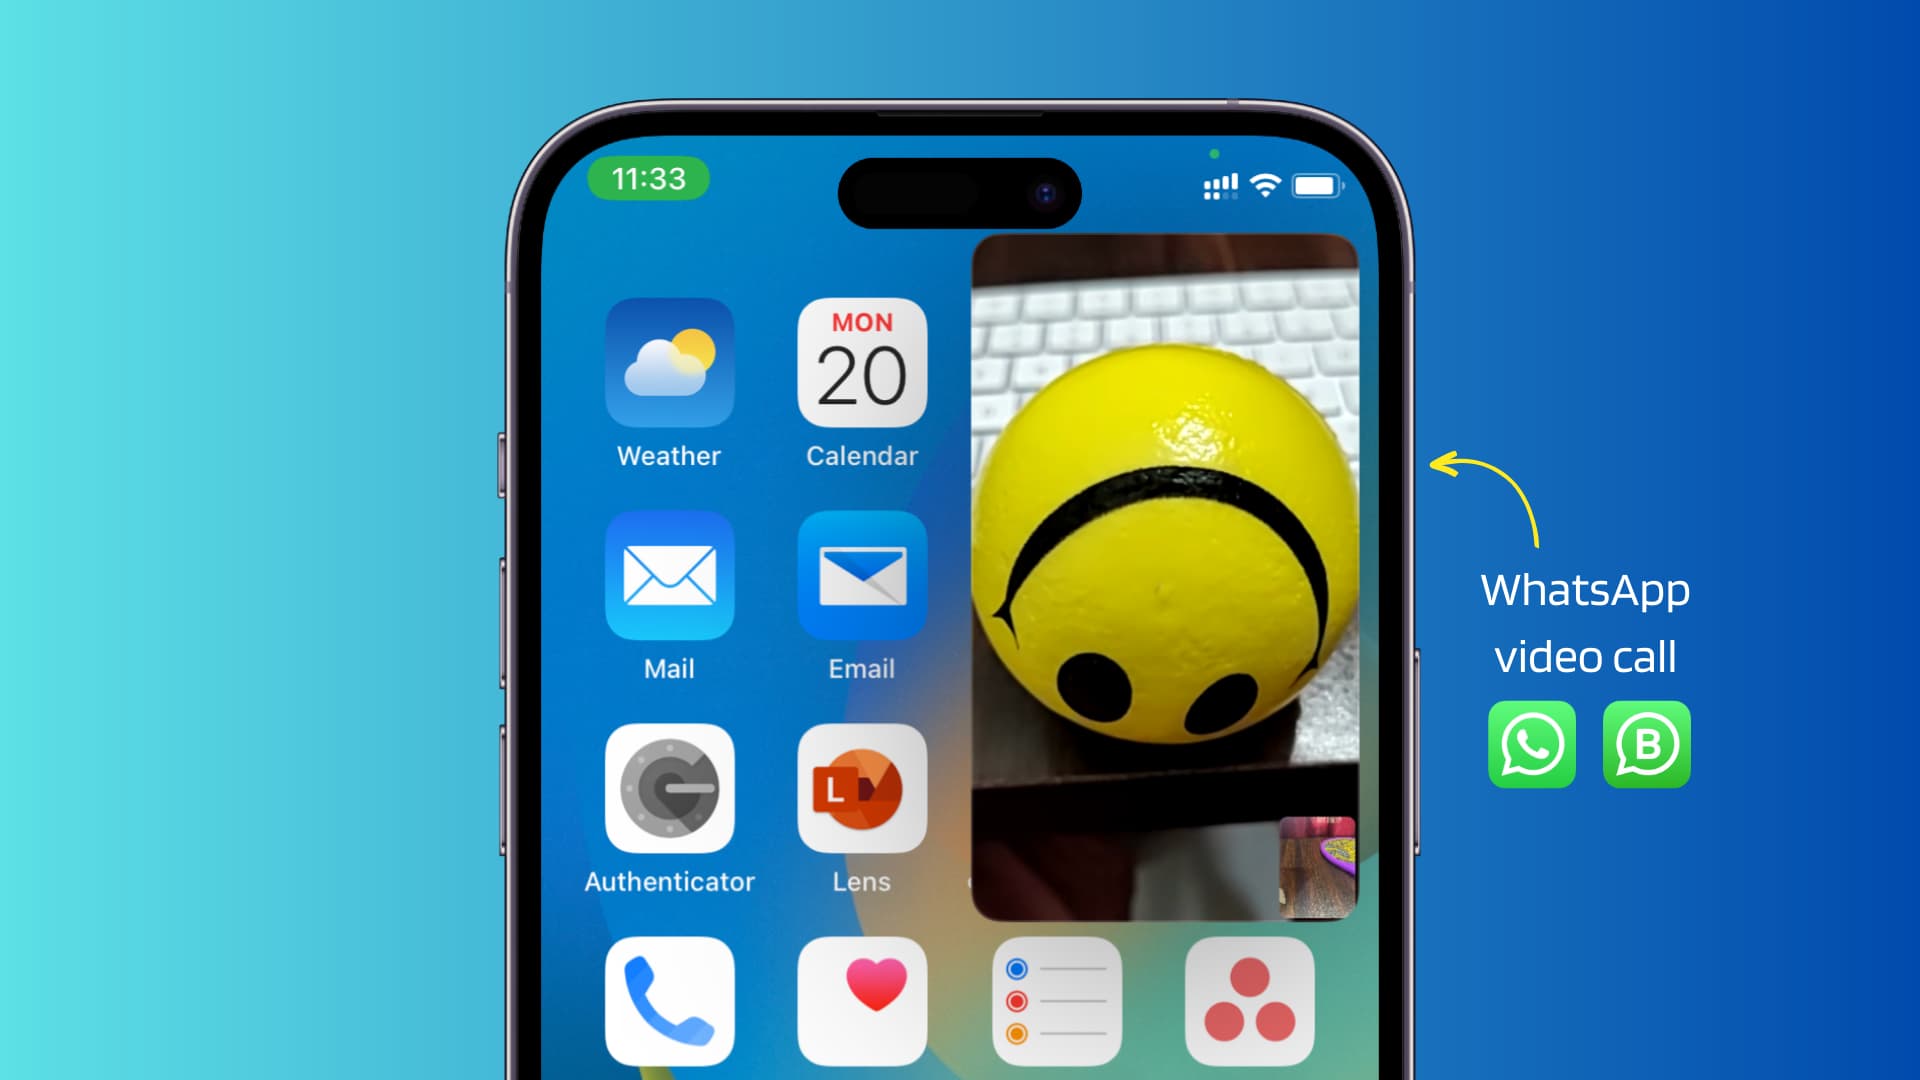 WhatsApp video call in Picture in Picture mode on iPhone